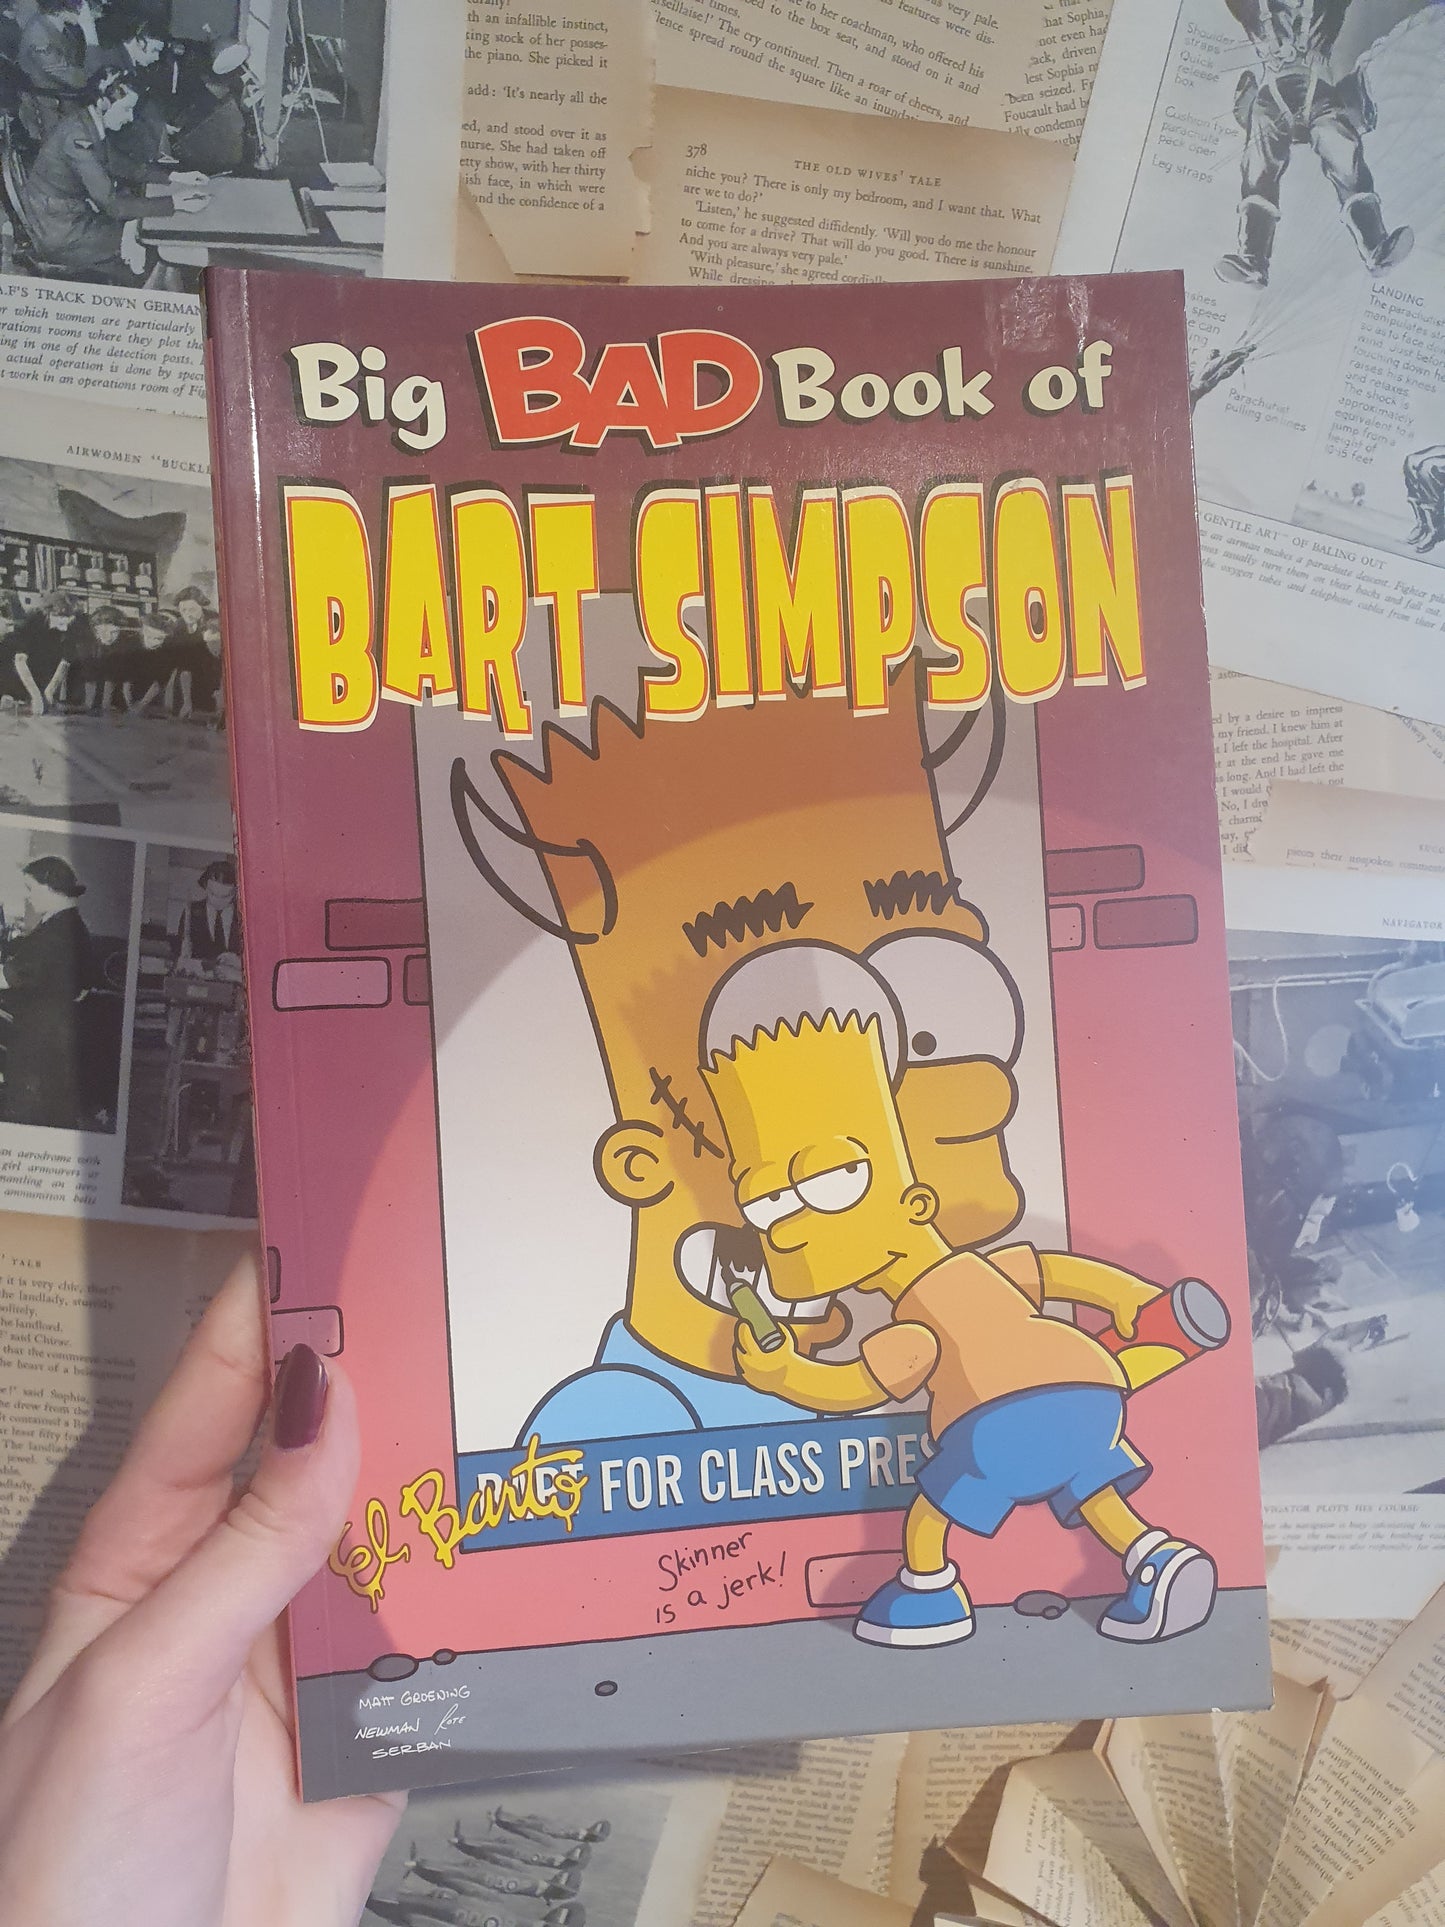 Big Bad Book of Bart Simpson by Groening (2003)